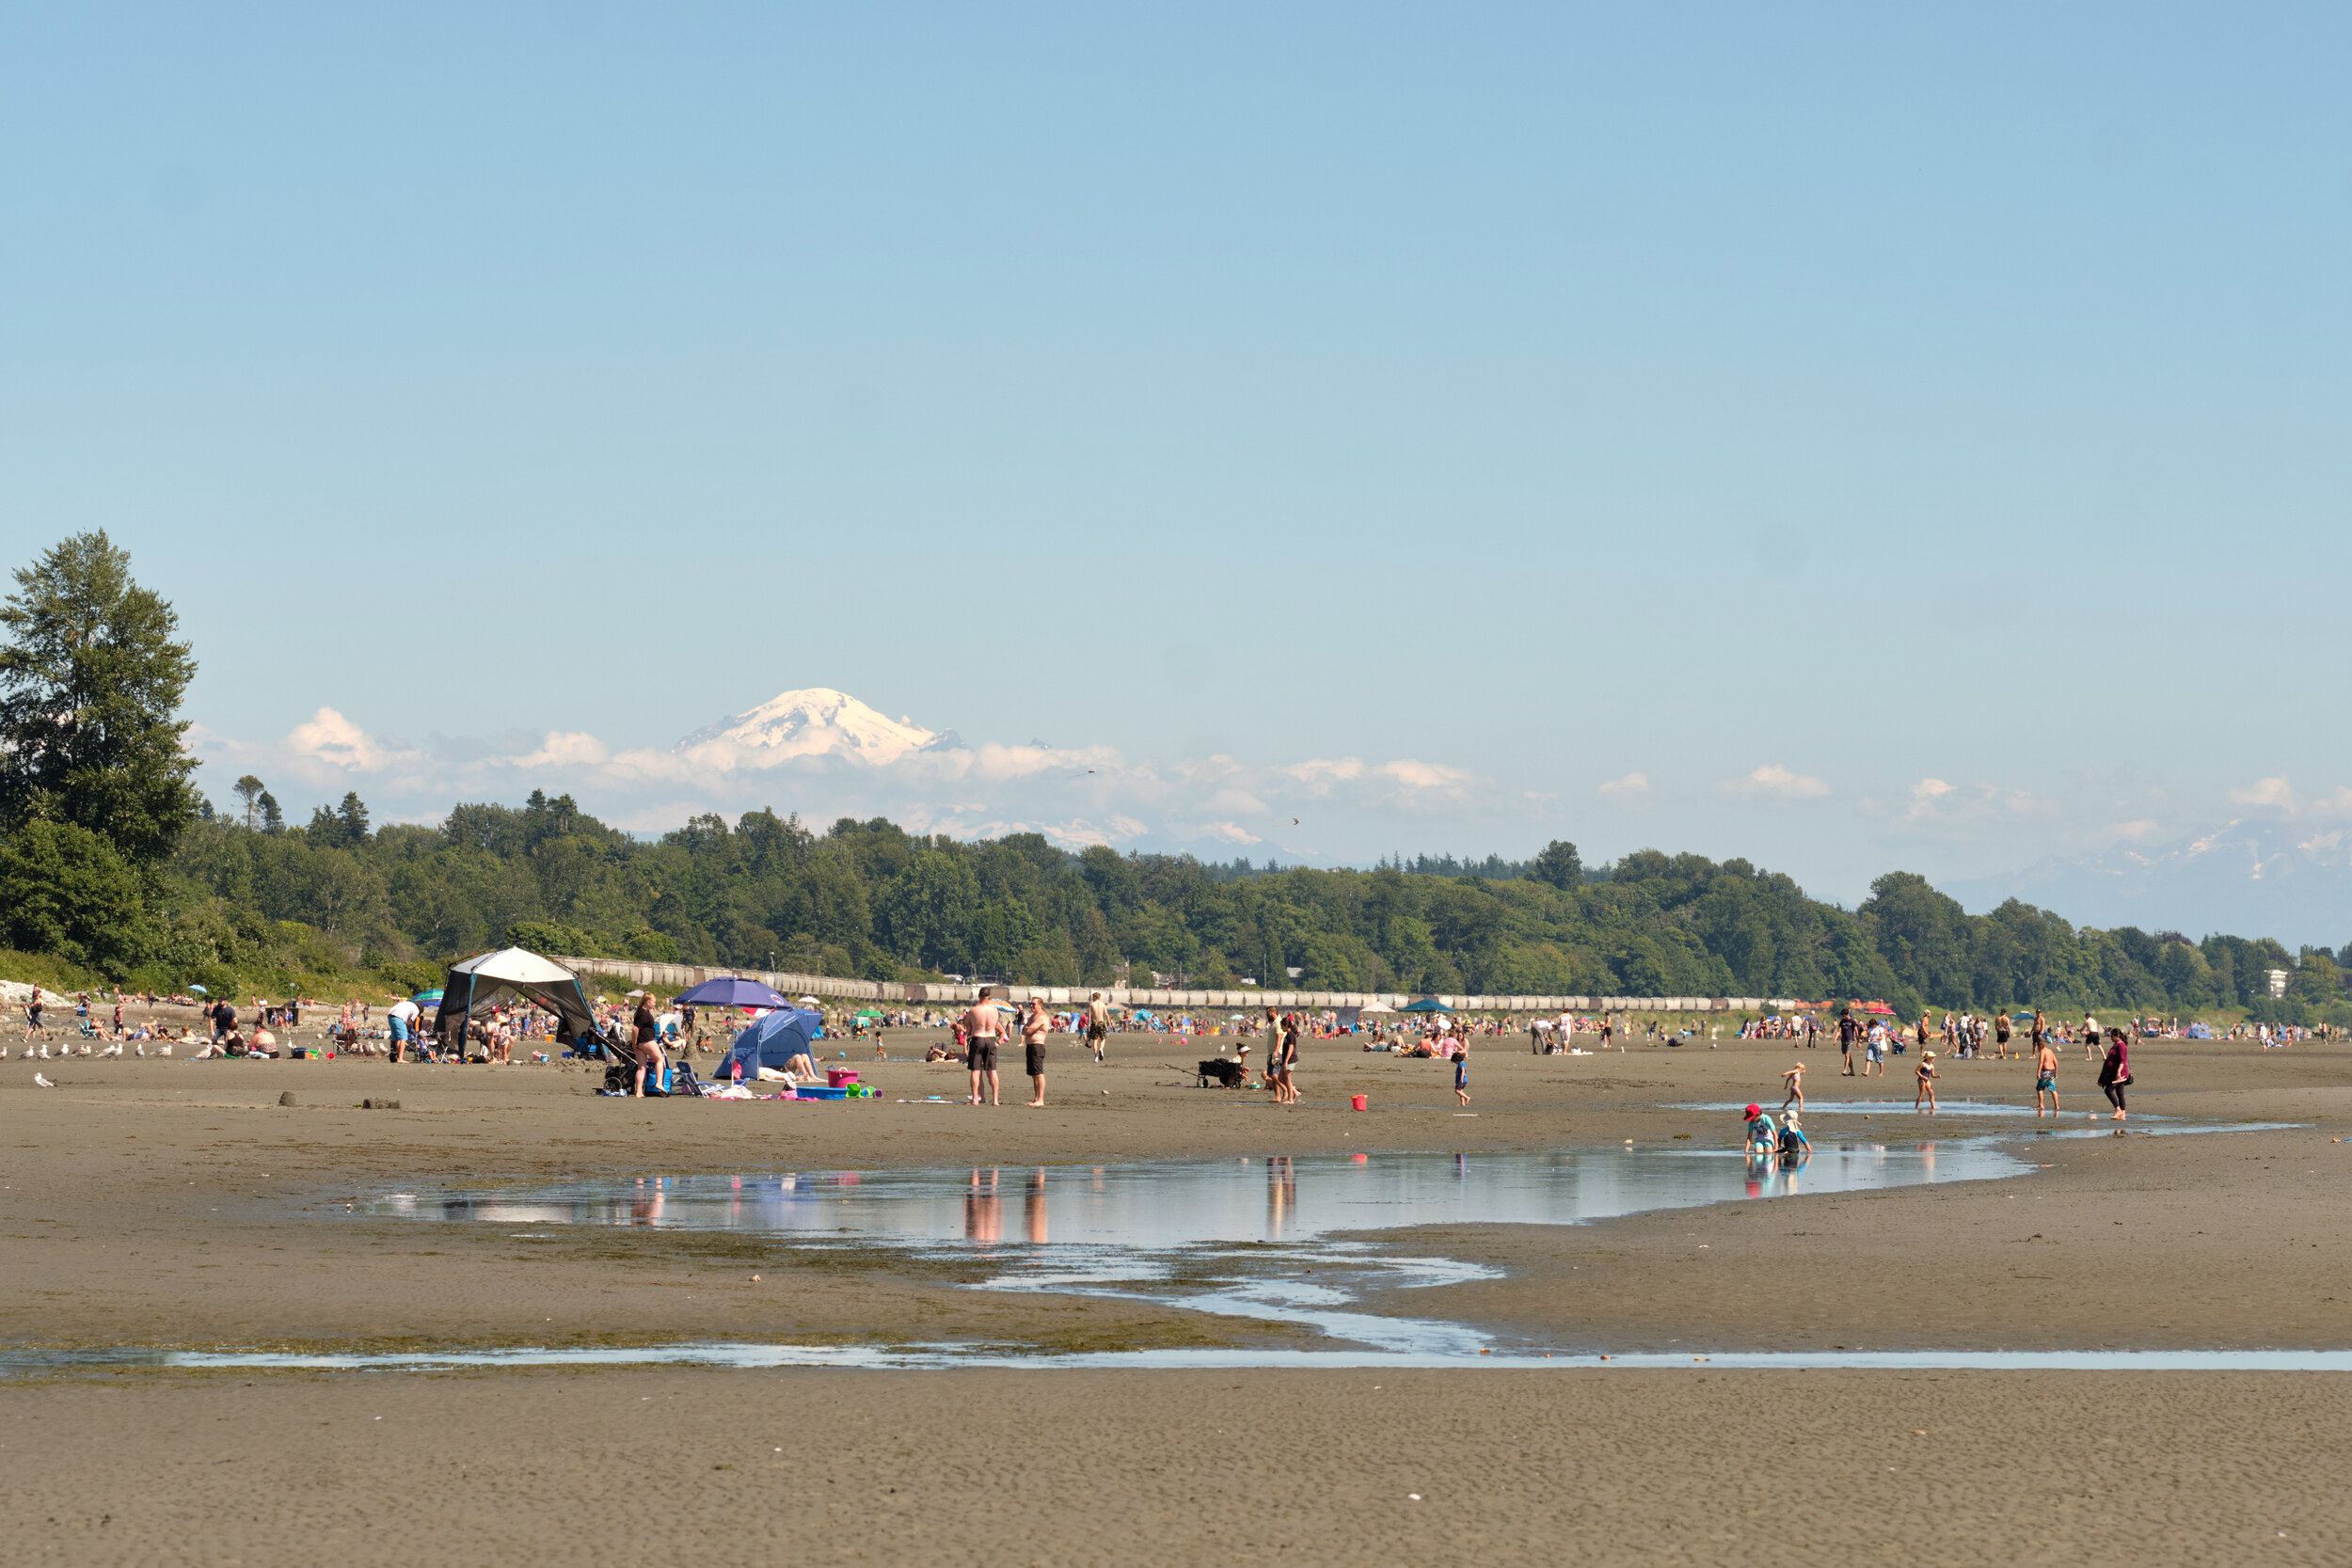 White Rock beach on a summer days with big crowds and Mt. Baker in the background